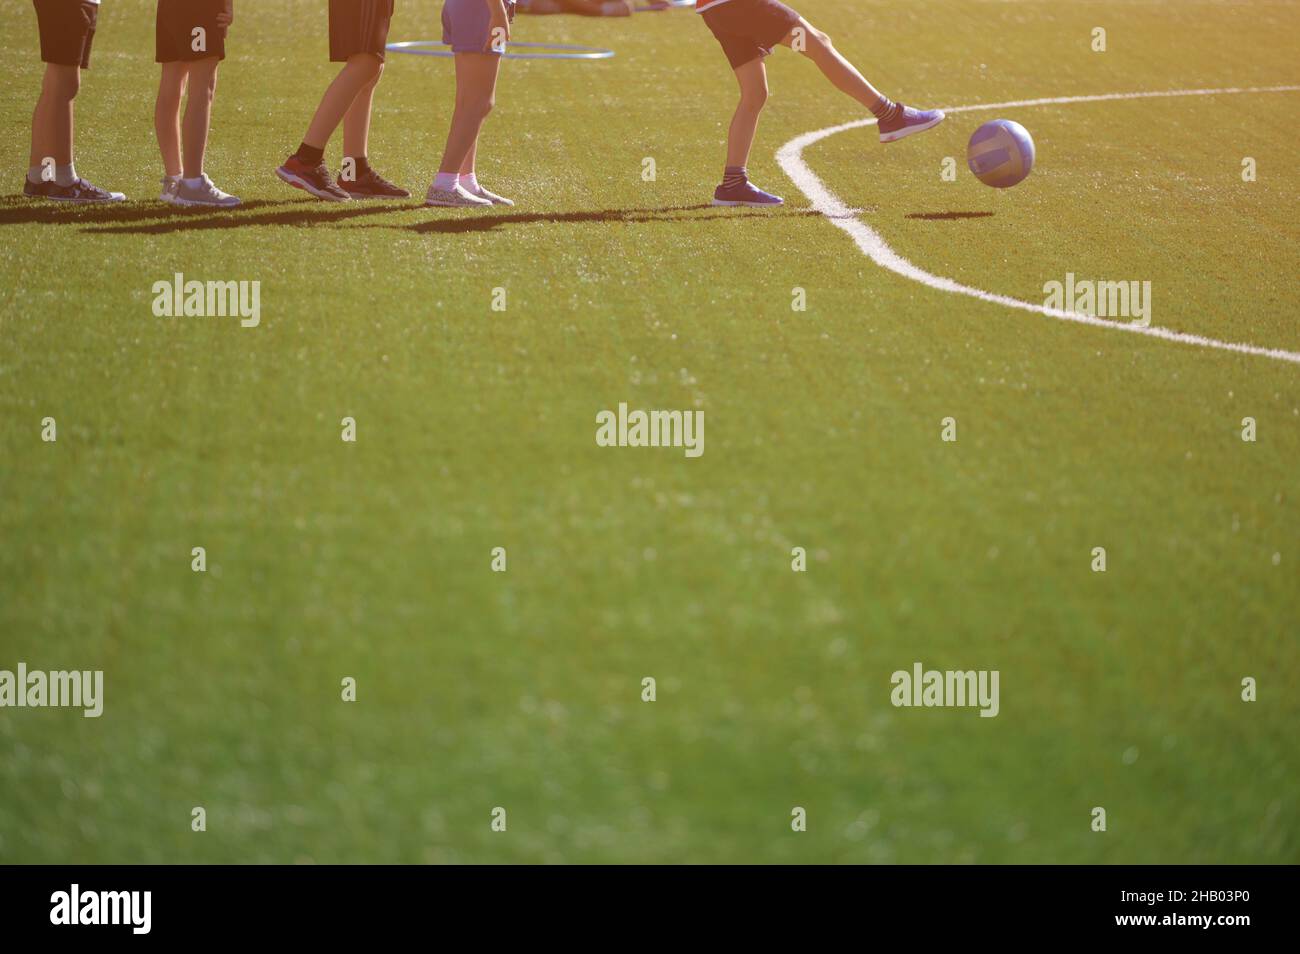 football and soccer shcool training group of kids kicking ball on green field Stock Photo